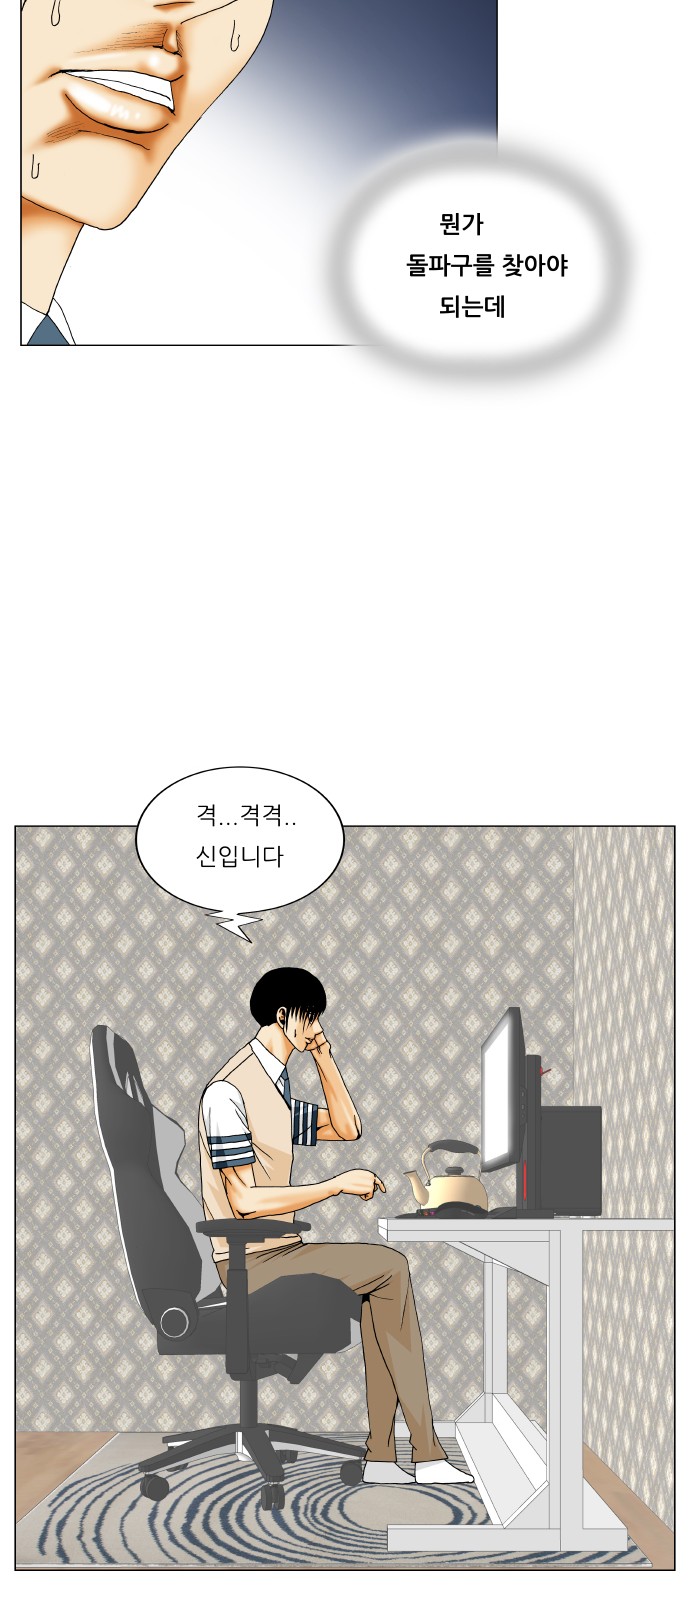 Ultimate Legend - Kang Hae Hyo - Chapter 343 - Page 4